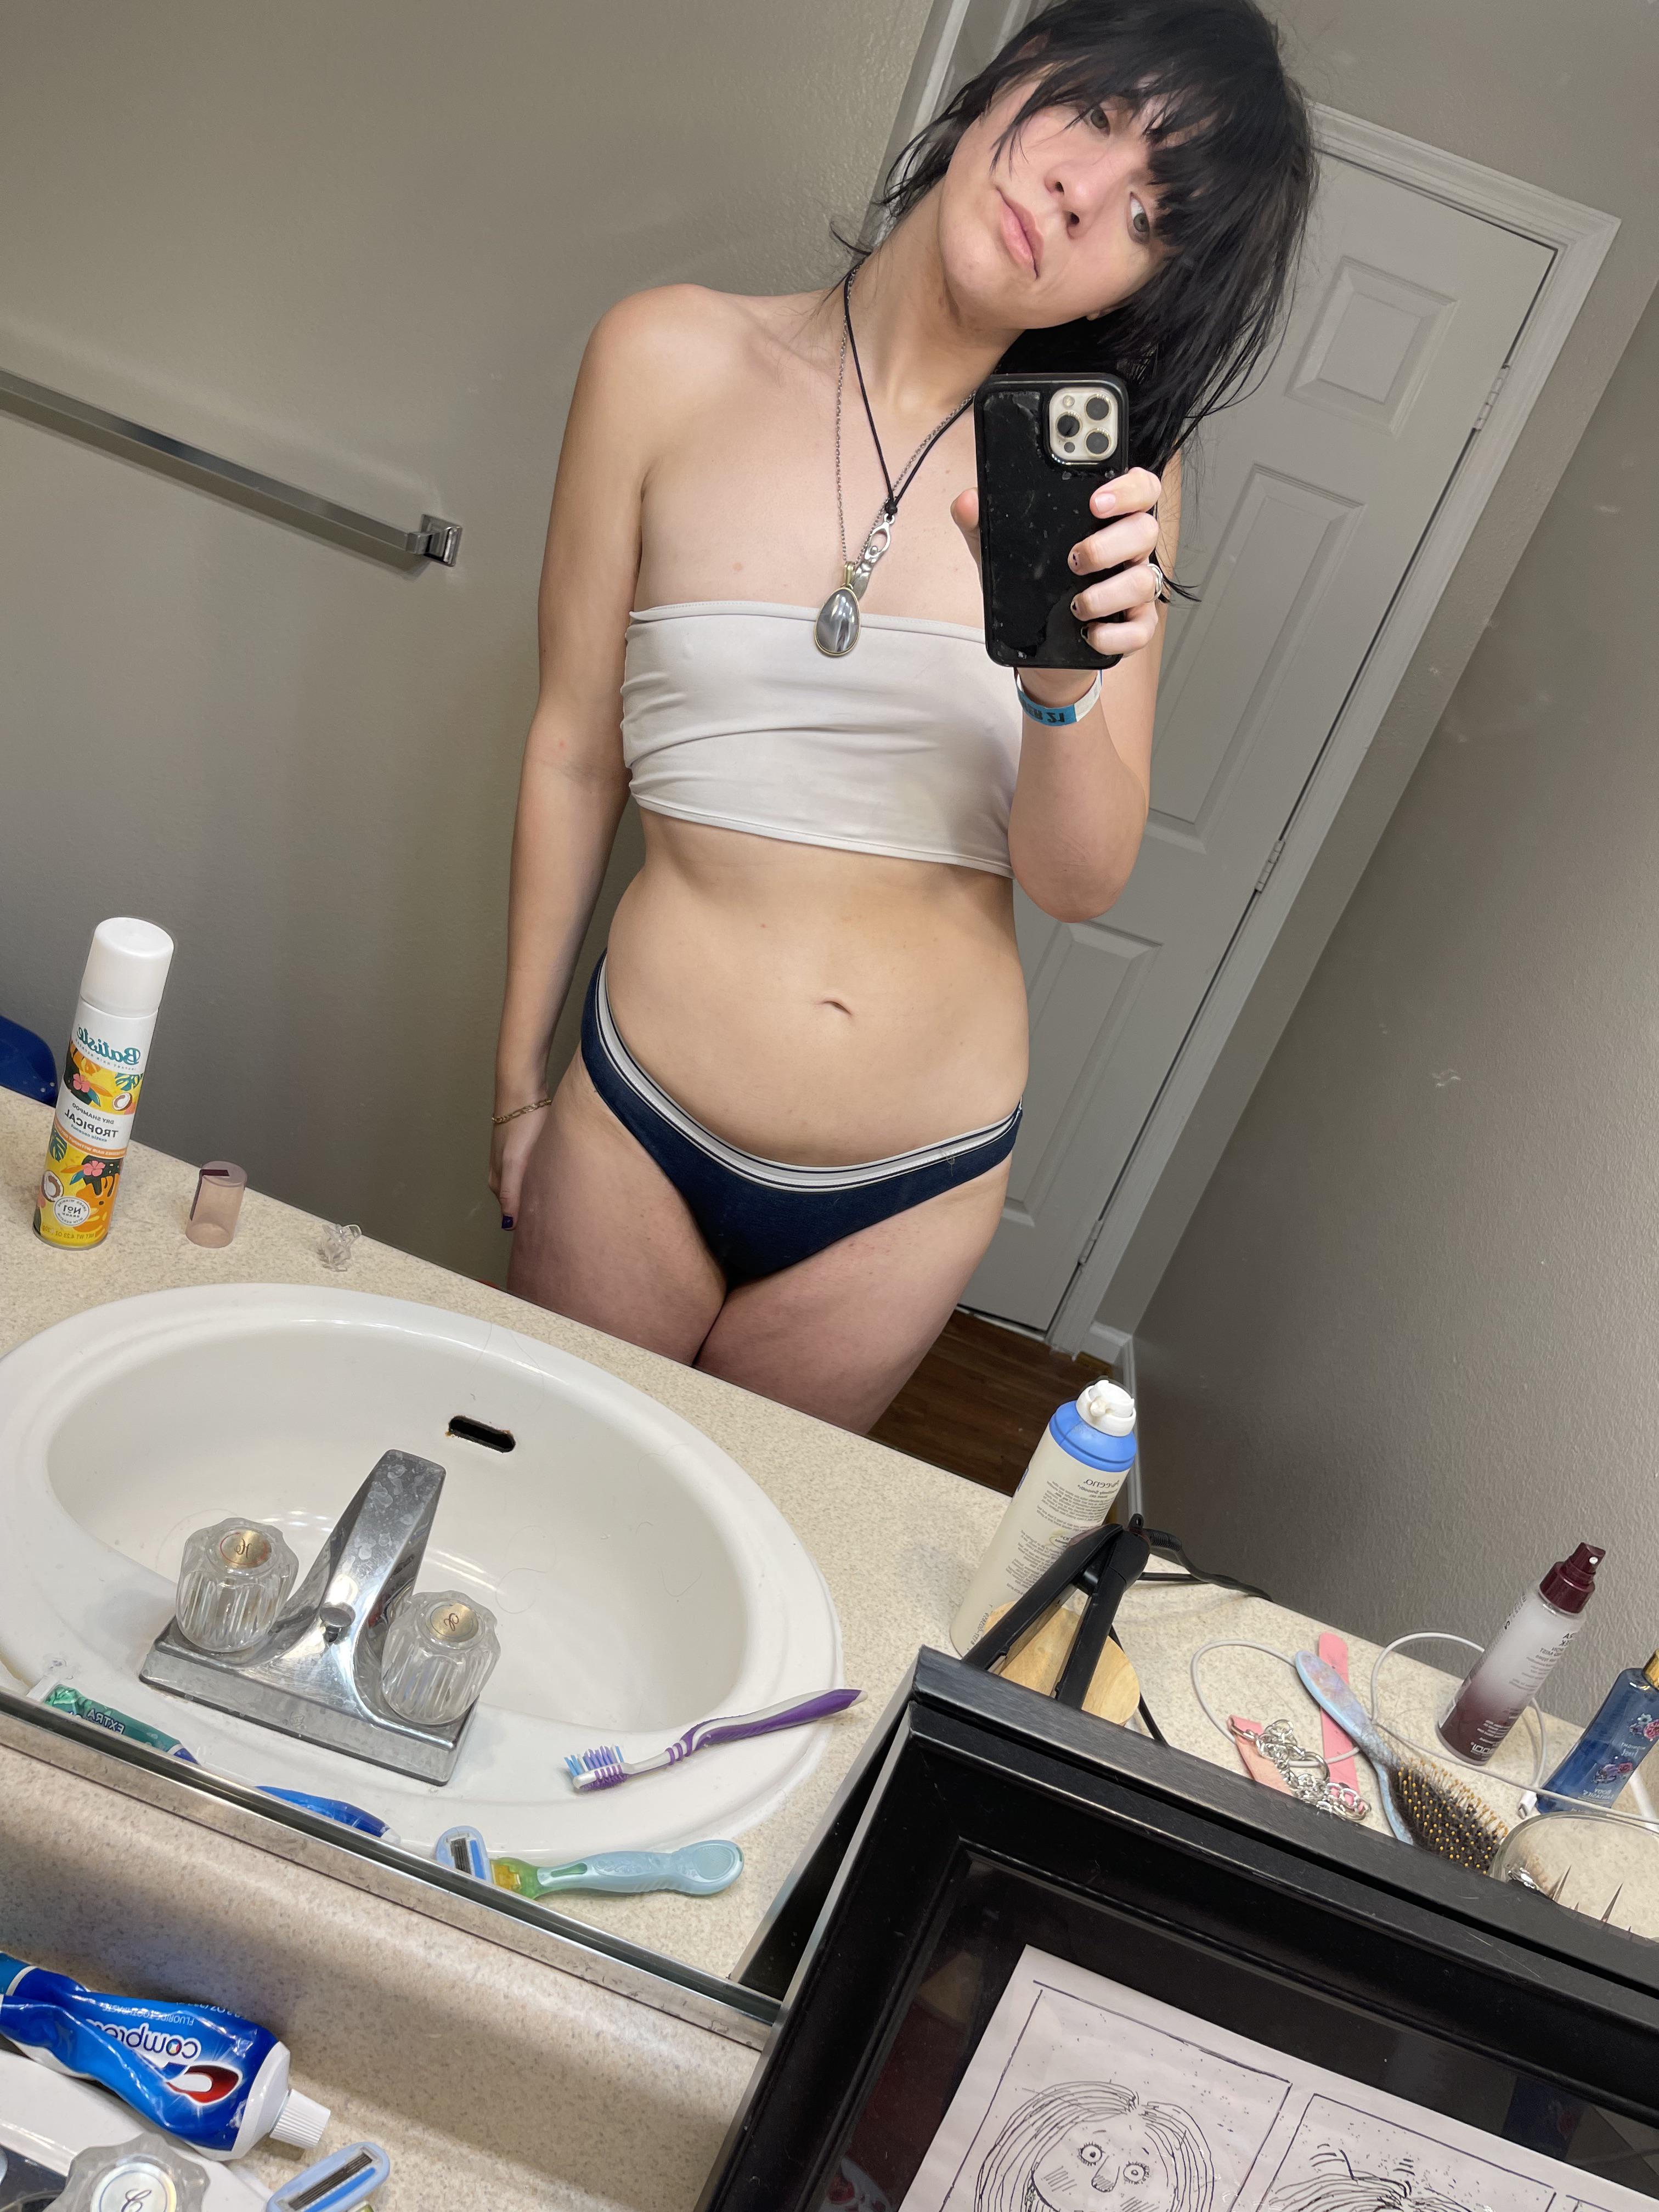 you wouldn’t download a sleepy bed head trans gf would you? 10l197n - transexual woman